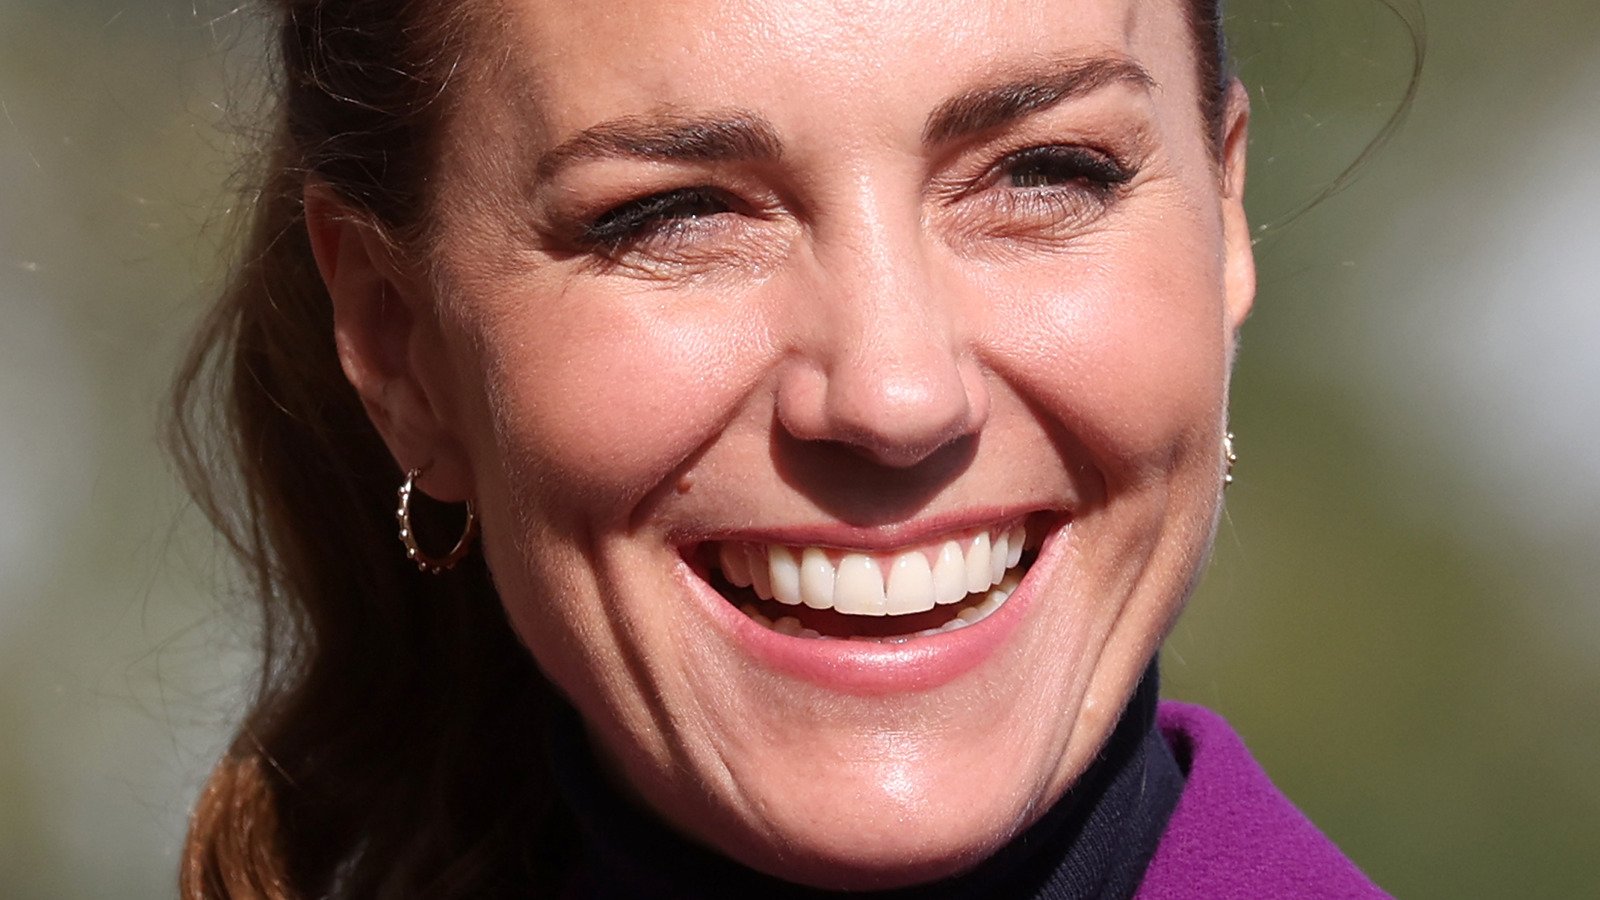 A Resurfaced Video Of Kate Middleton Has TikTokers Going Wild - The List